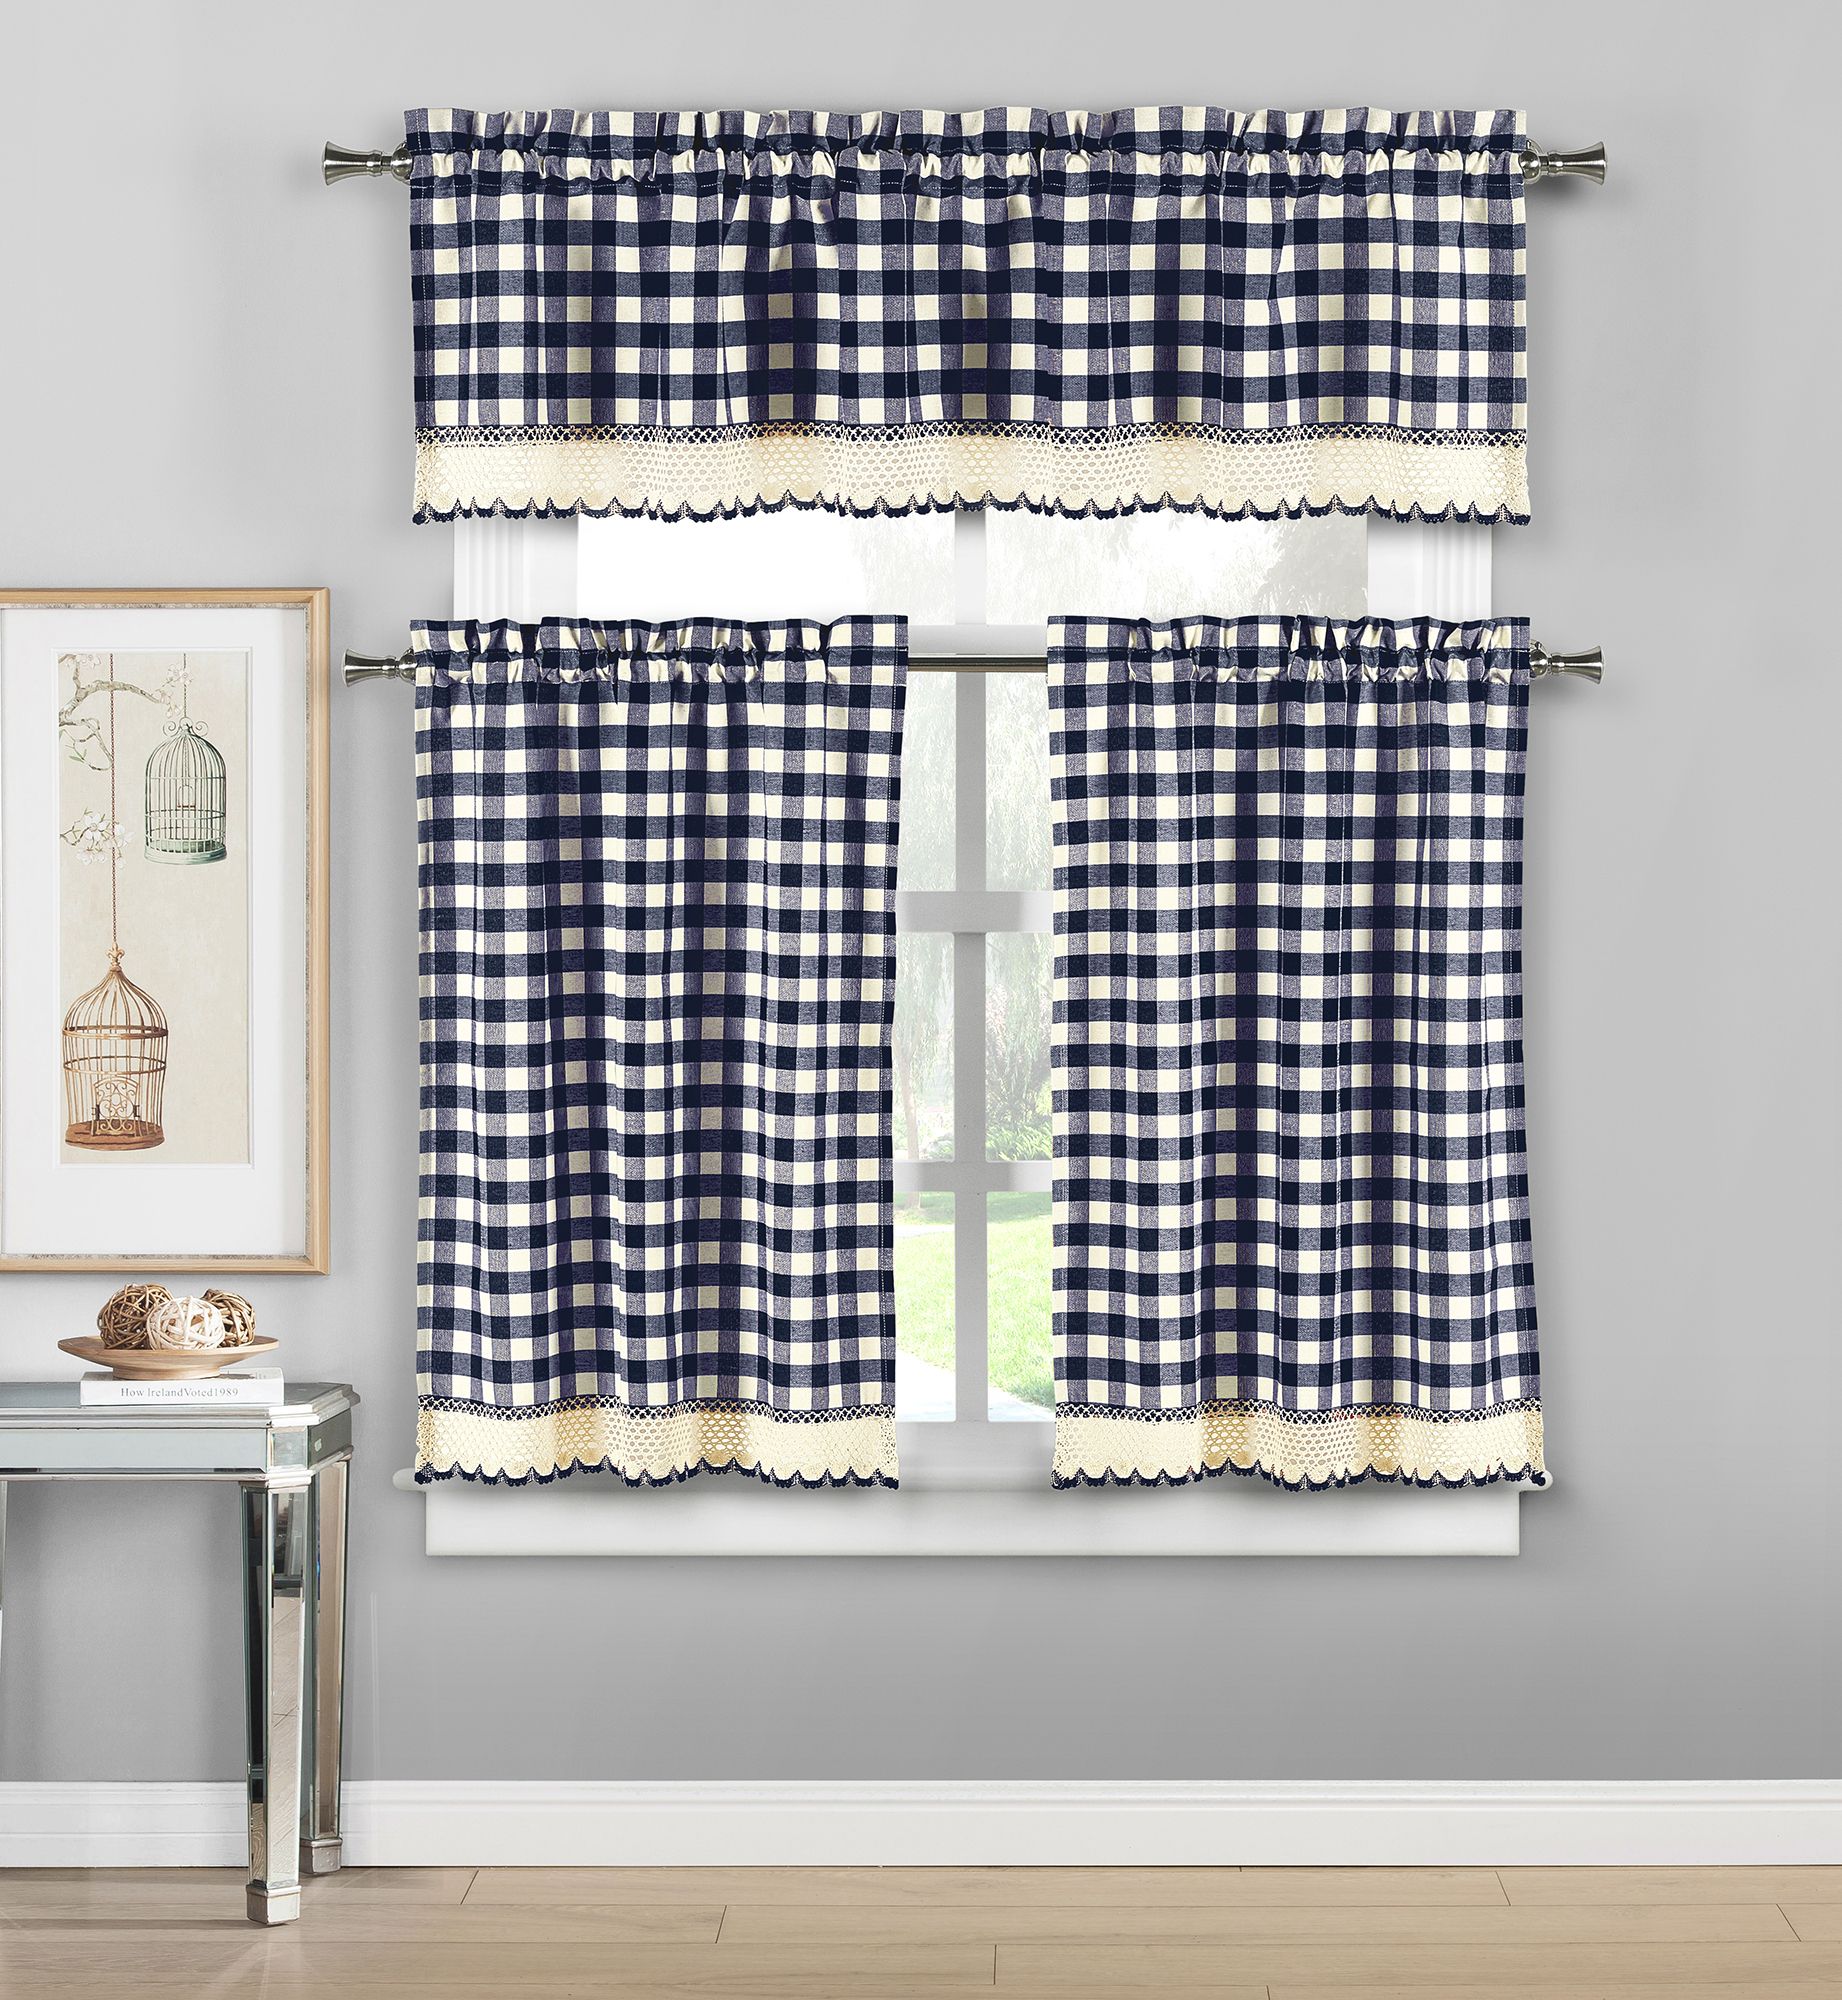 Details About Plaid Checkered 100% Cotton 3 Piece Set Window Kitchen  Curtain Tier & Valance Inside Burgundy Cotton Blend Classic Checkered Decorative Window Curtains (View 10 of 20)